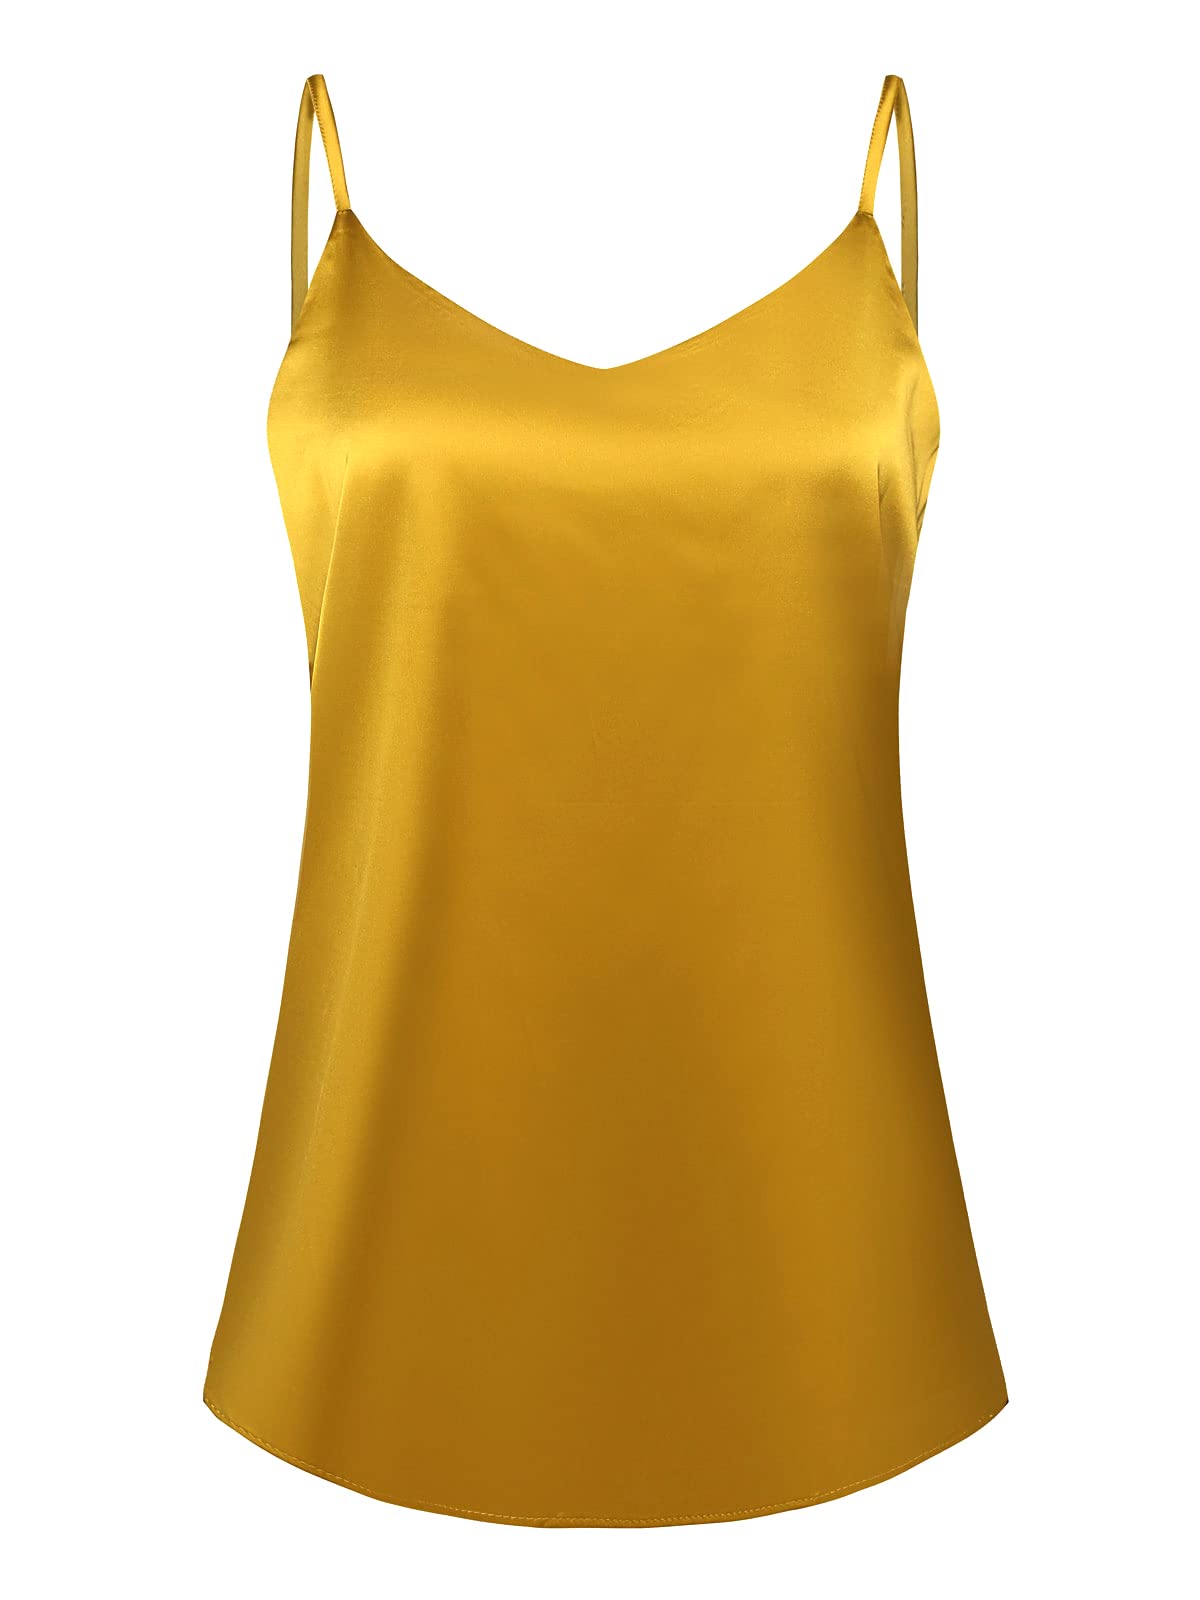 7th Element Womens Silk Satin Camisole Plus Size Tank Tops V Neck Casual Cami Sleeveless Blouses Summer Basic Tank Shirt(Mustard Yellow,L)